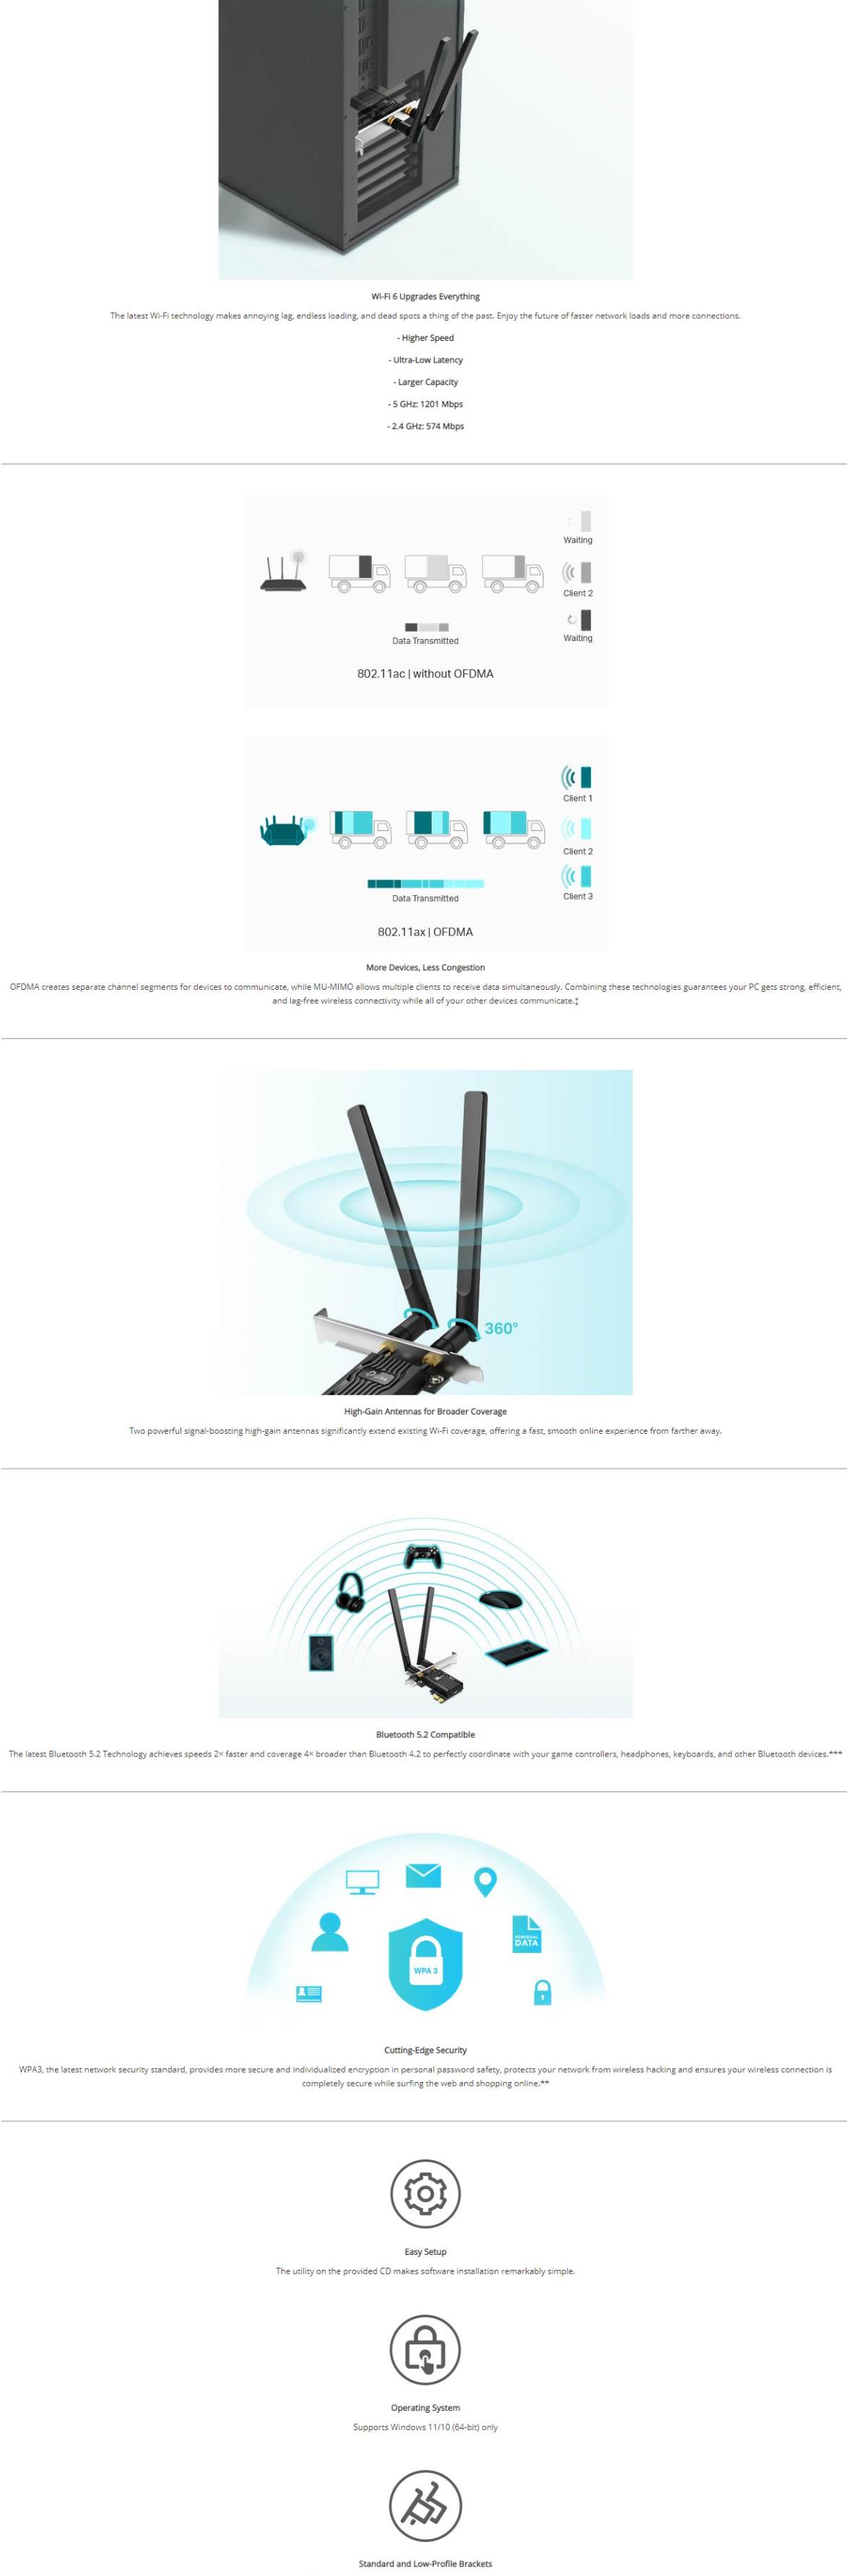 A large marketing image providing additional information about the product TP-Link Archer TX20E - AX1800 Dual-Band Wi-Fi 6 Bluetooth 5.2 PCIe Adapter - Additional alt info not provided